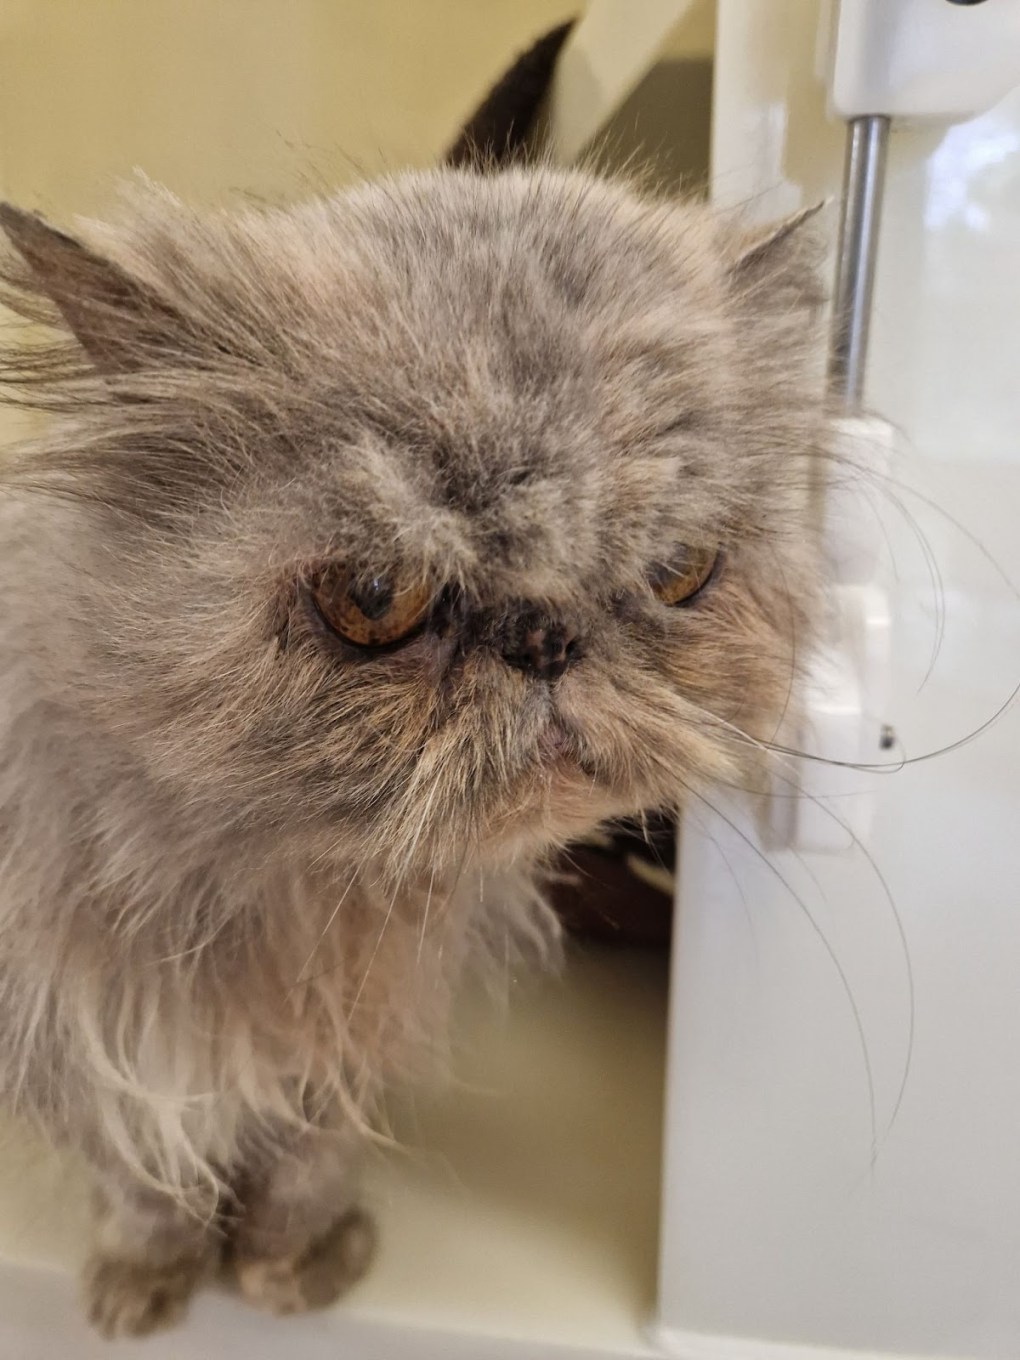 The Challenges of Rehoming Flat-Faced Cats: Health Issues and Public Awareness